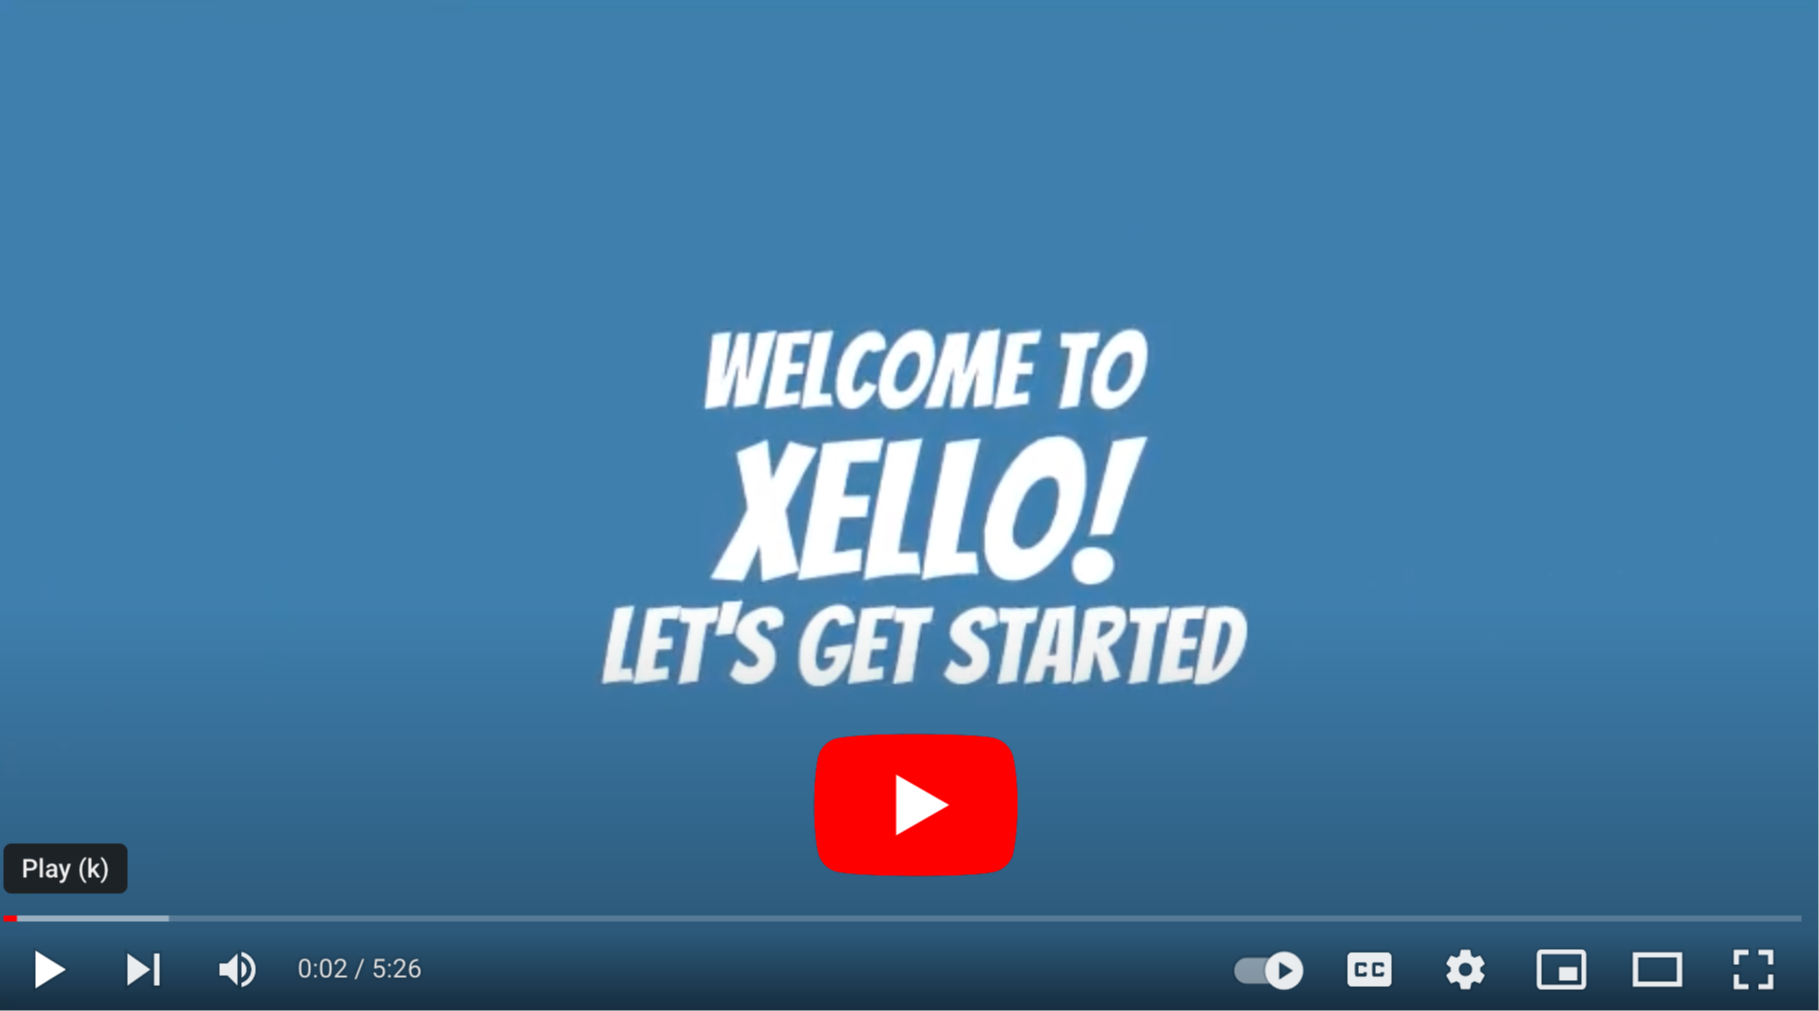 getting started with Xello